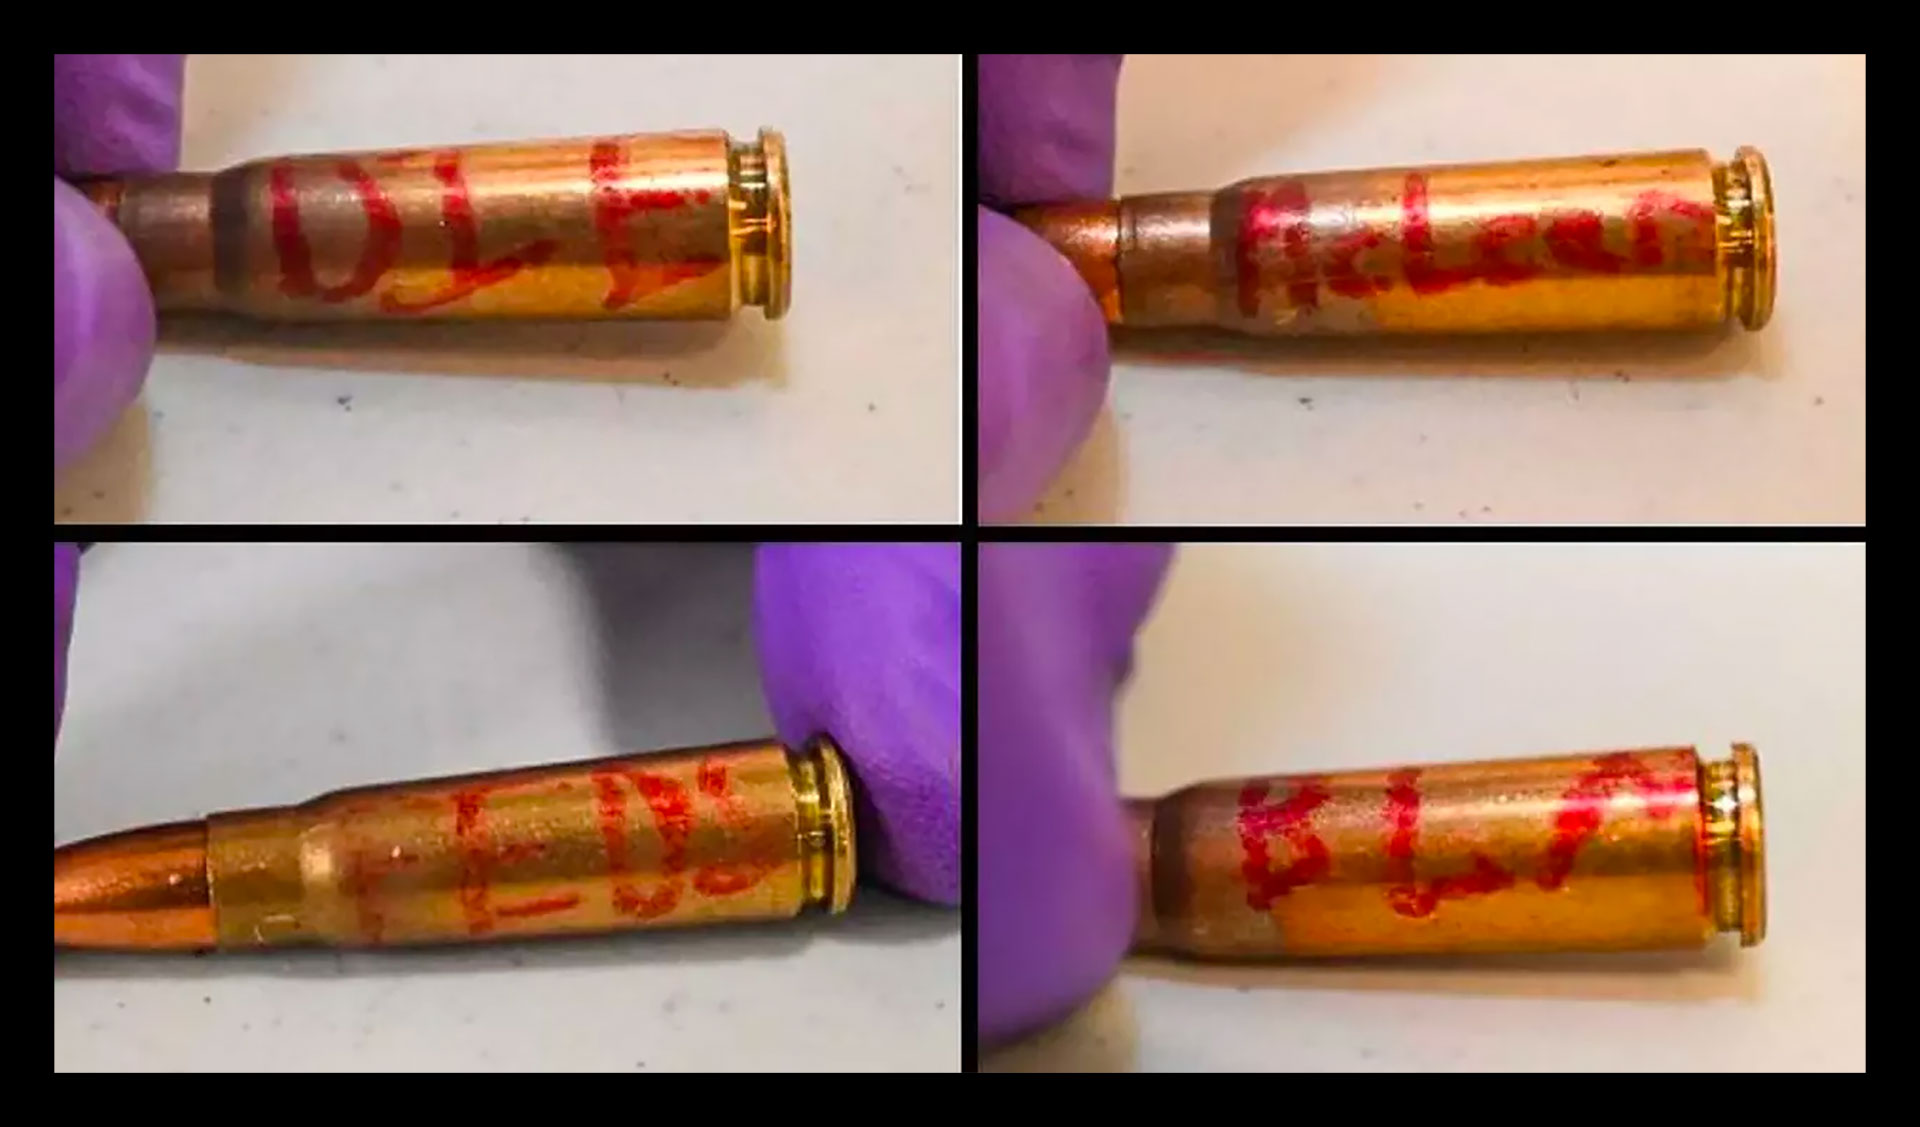 four bullets, with the words “Die,“ “McLean,” “Feds,” and “BLM” written on them